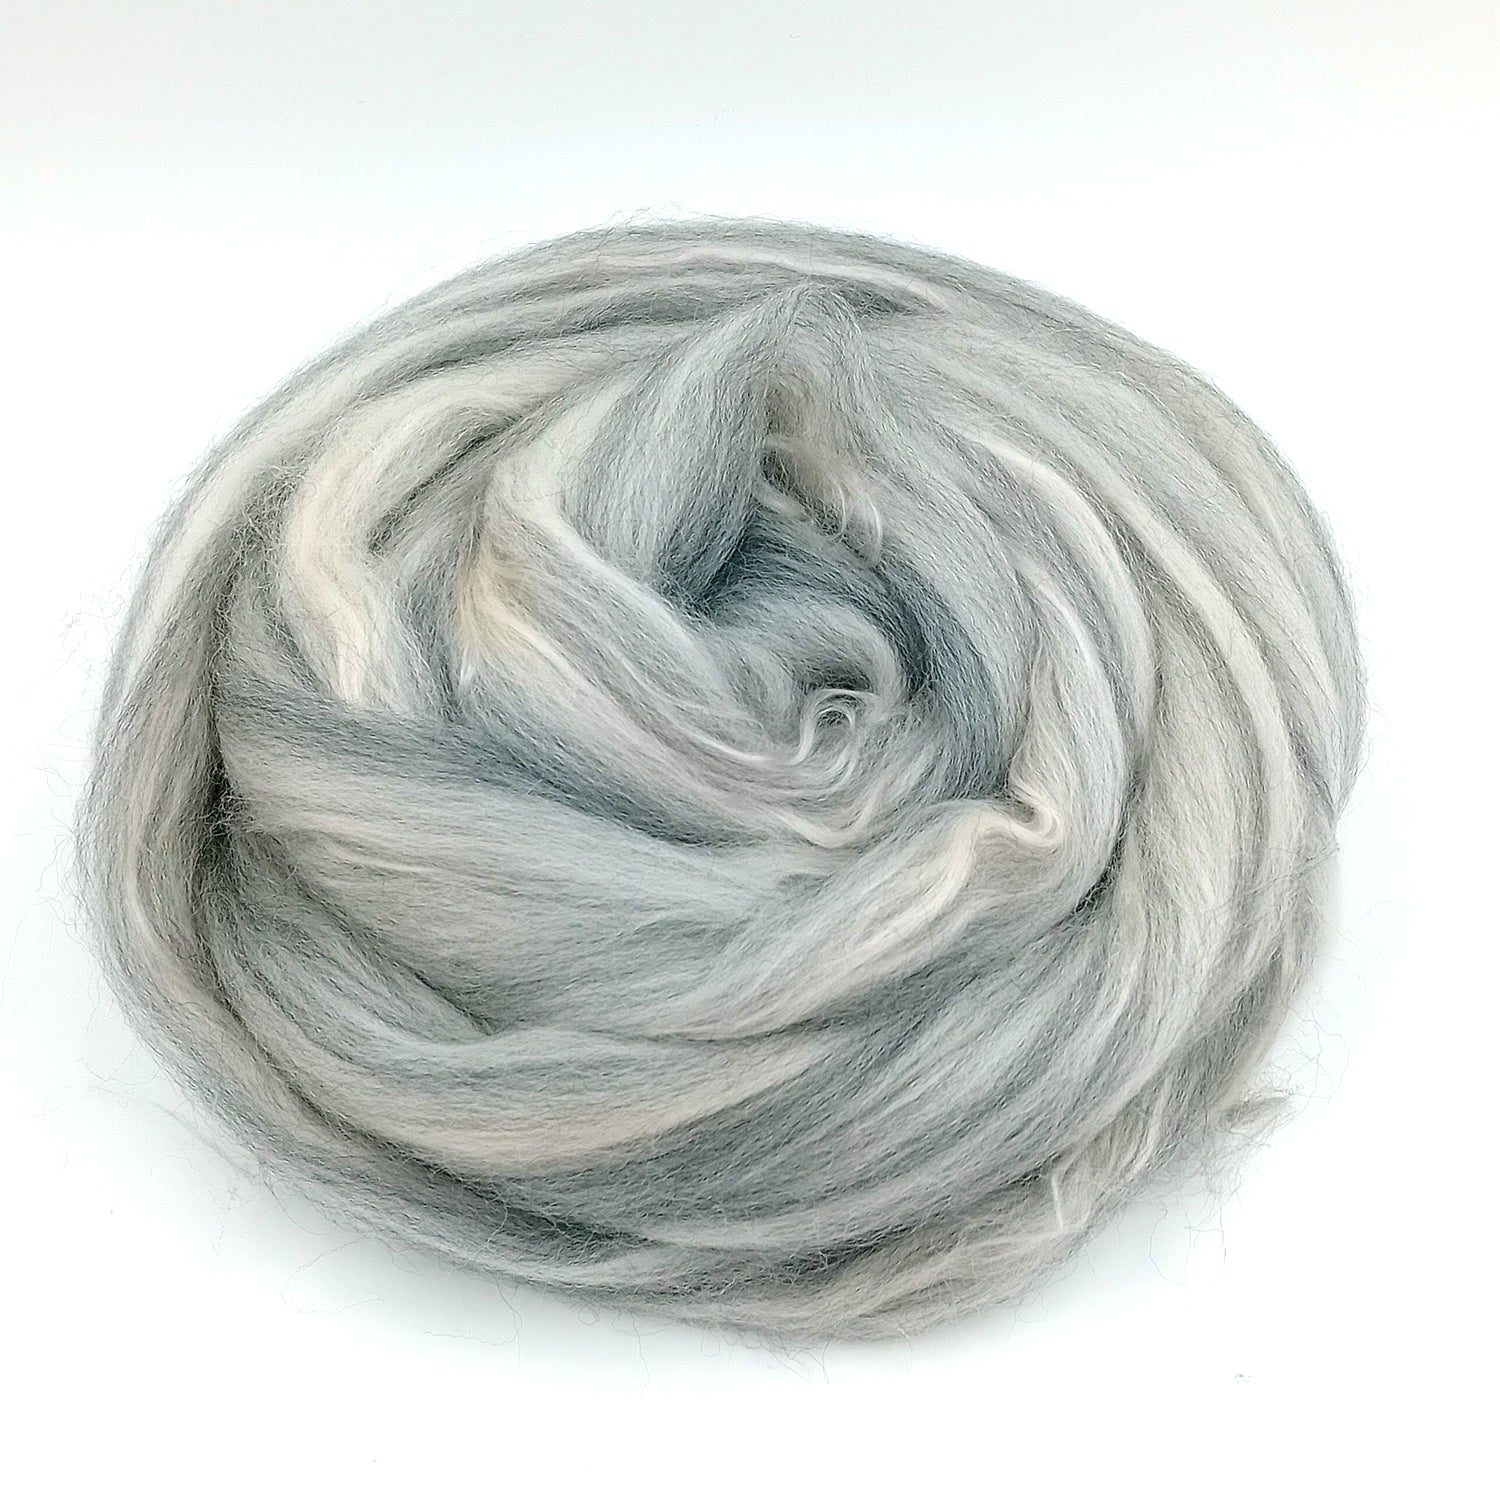 Corriedale wool blended with seacell fibre